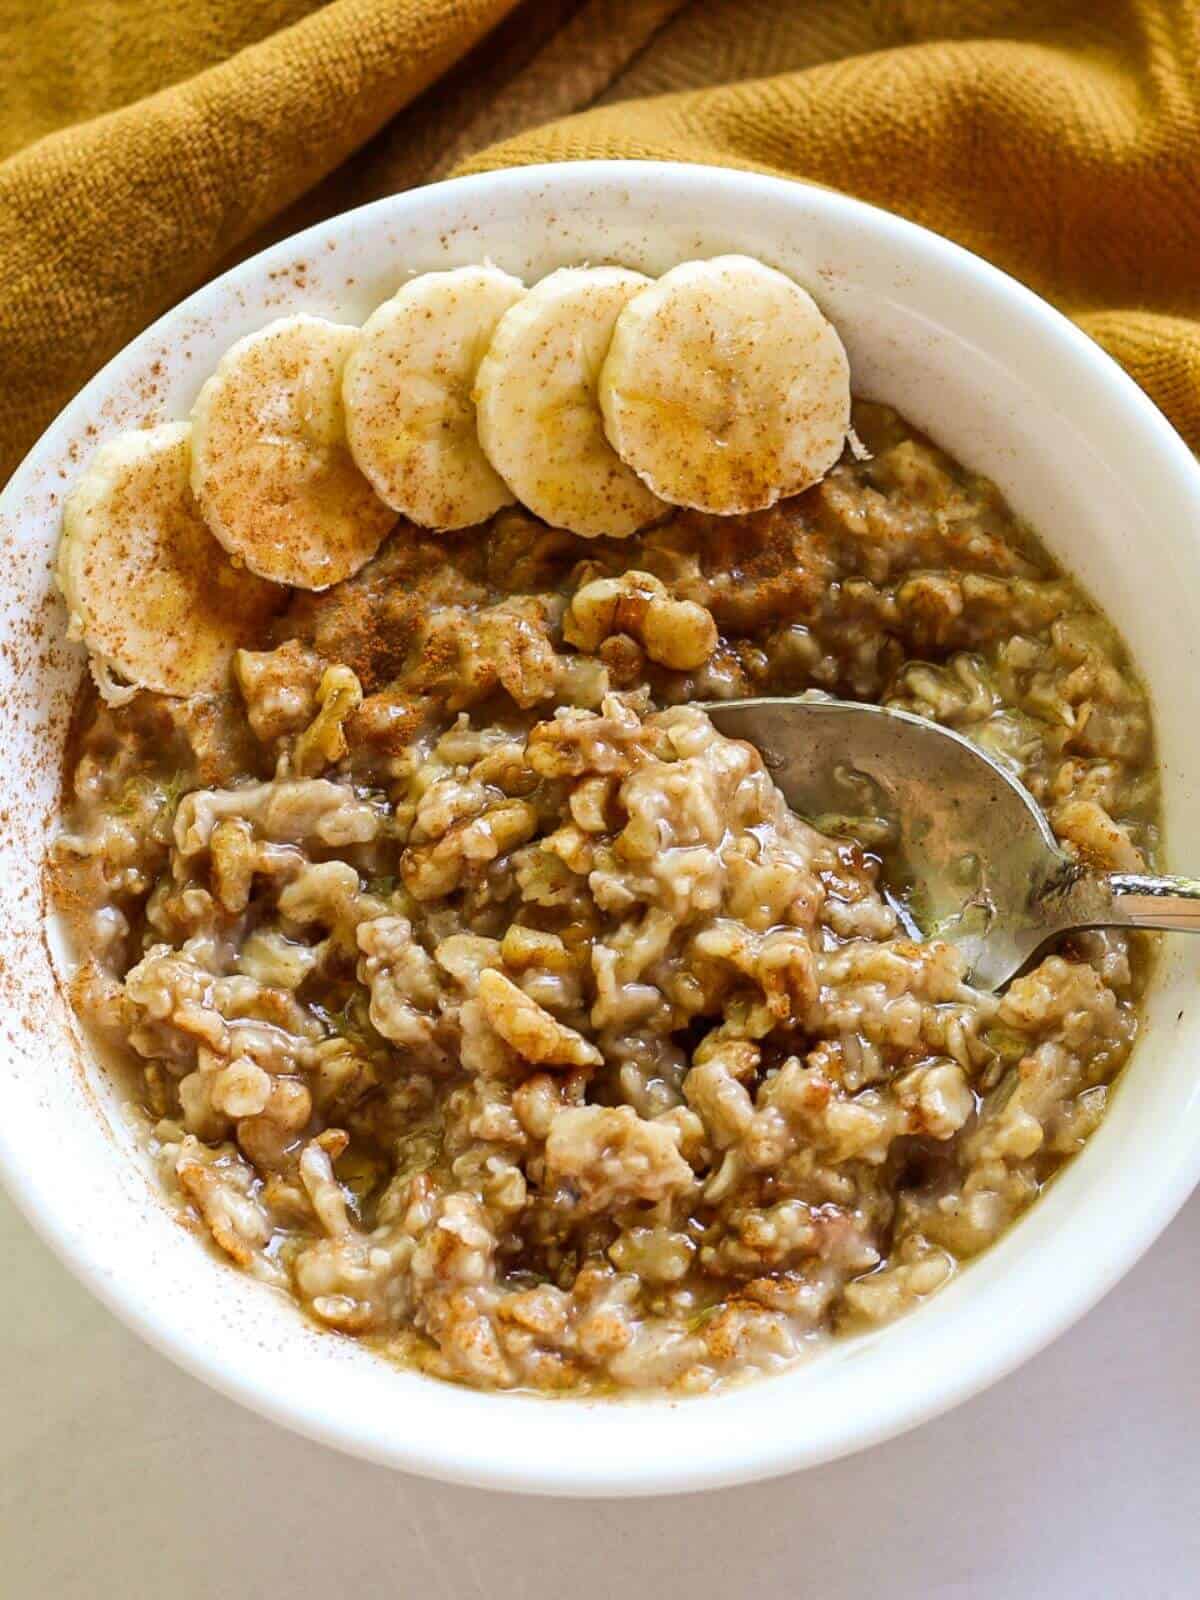 Overhead shot of a white bowl filled with cooked oatmeal. It is sprinkled with brown sliced and has sliced bananas on a side. There is a spoon dipped in the porridge.